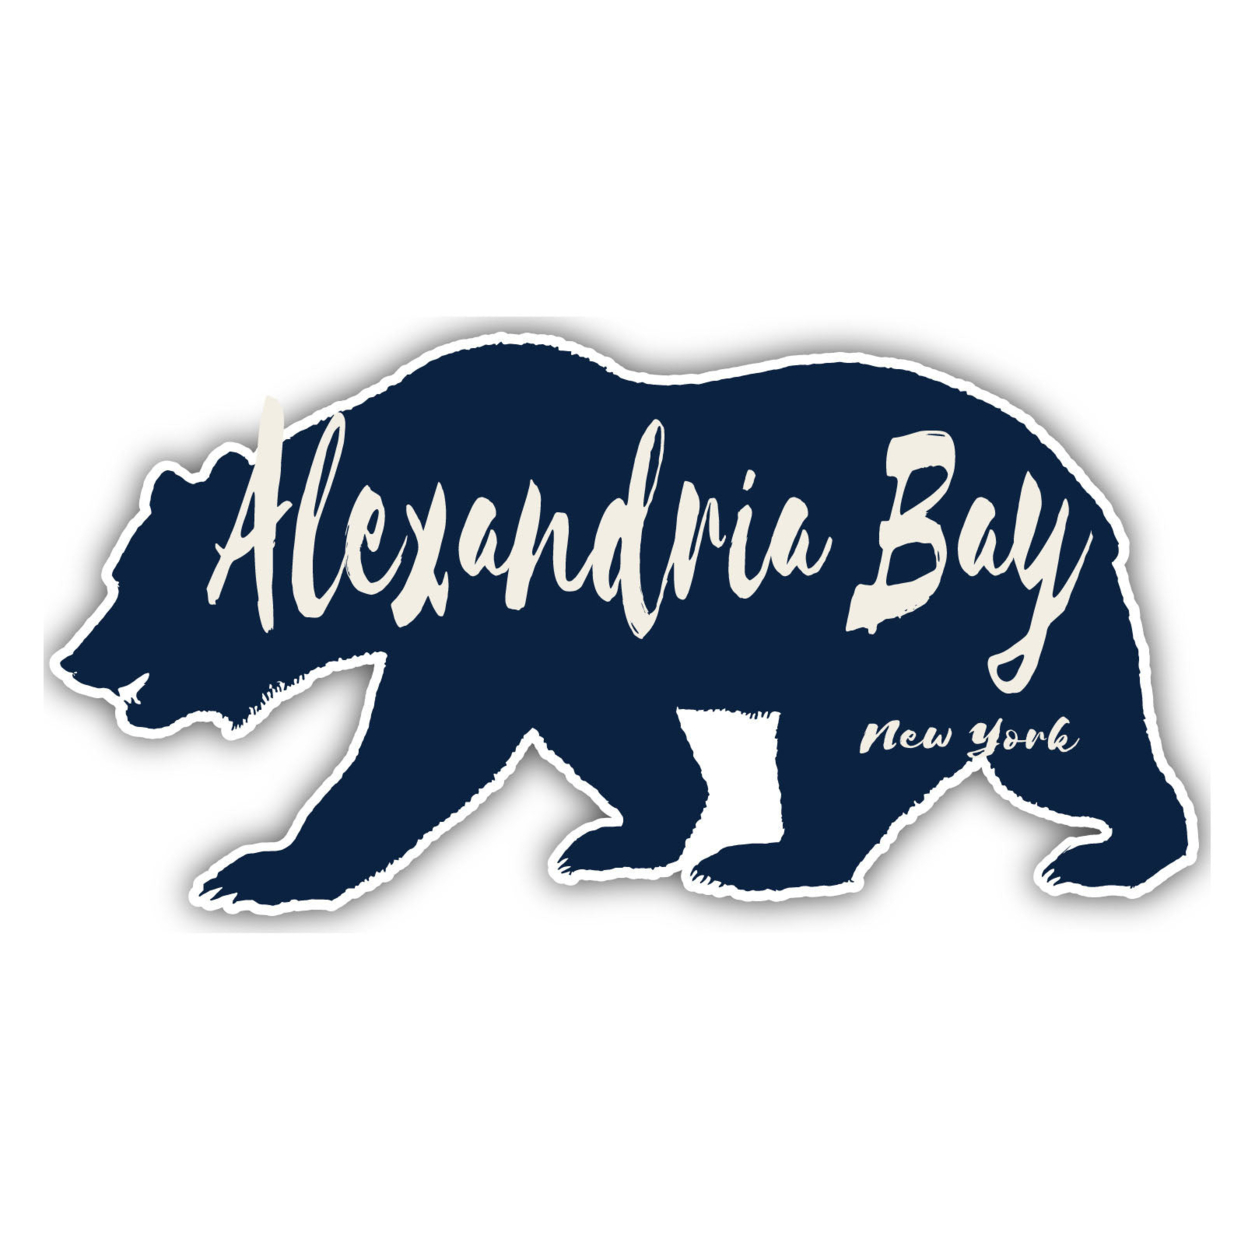 Alexandria Bay New York Souvenir Decorative Stickers (Choose Theme And Size) - 4-Pack, 8-Inch, Tent